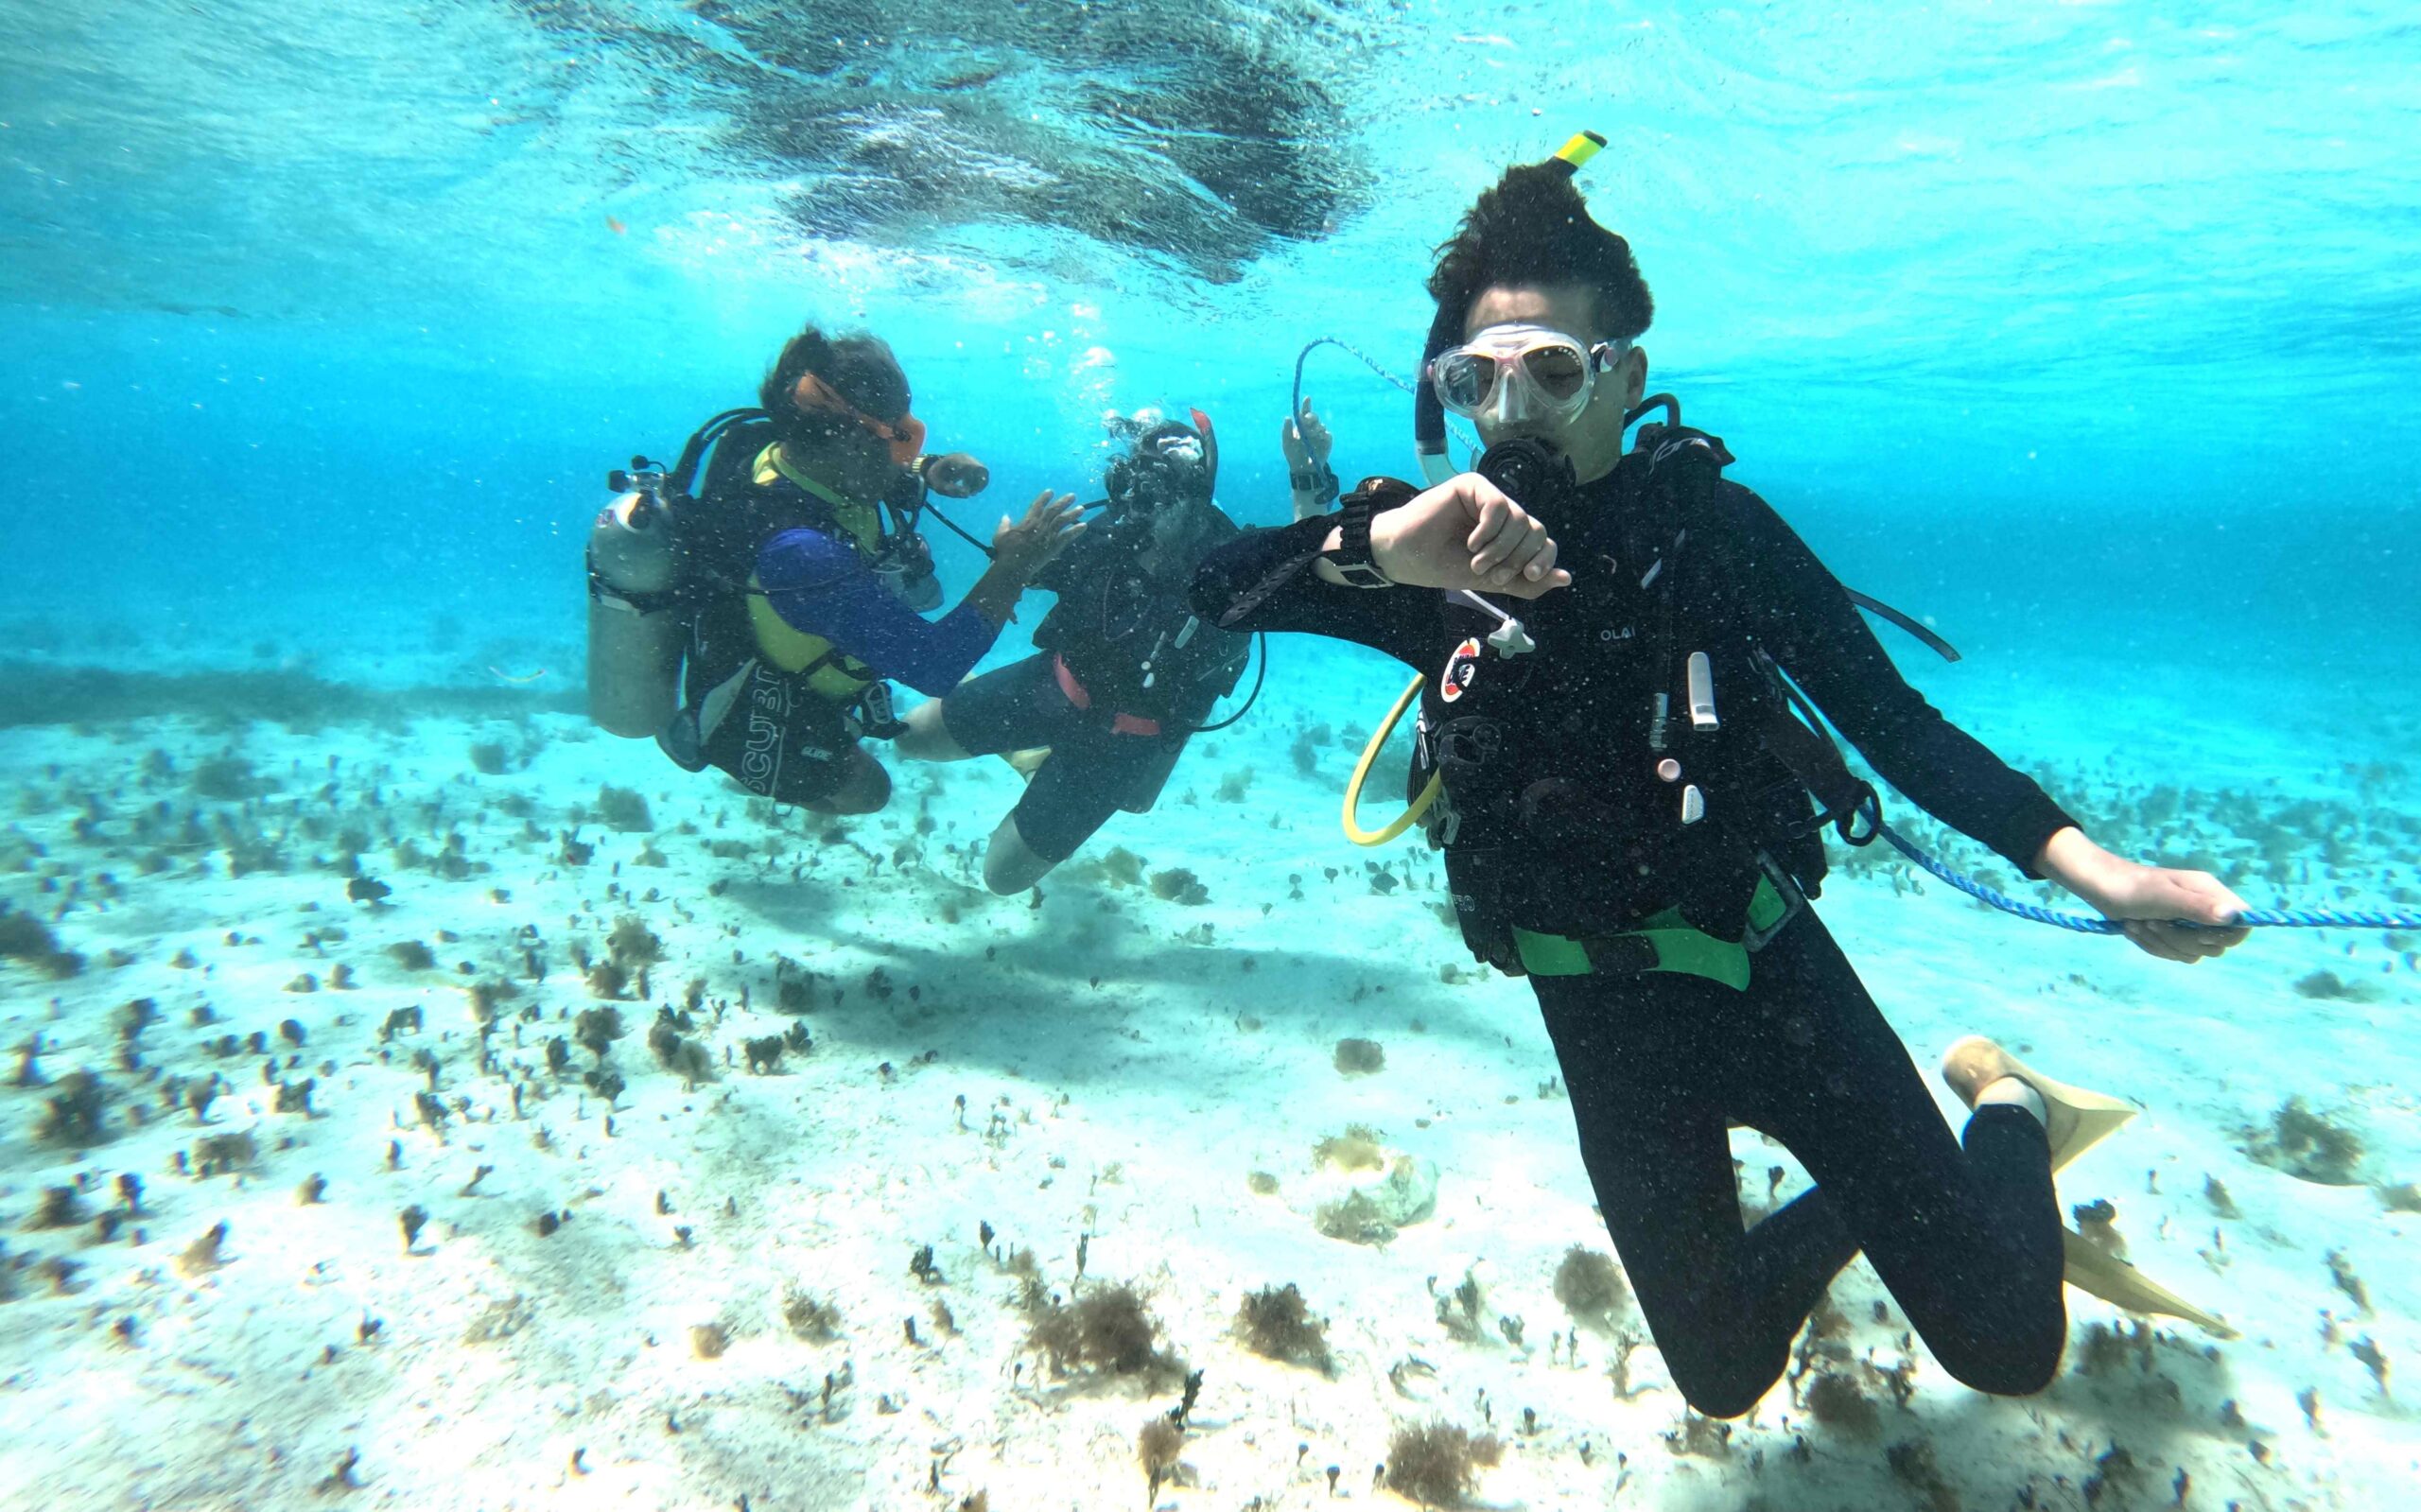 Dive shop owner Luis Banda takes us for a revision course in the shallow waters of San Andrés. 